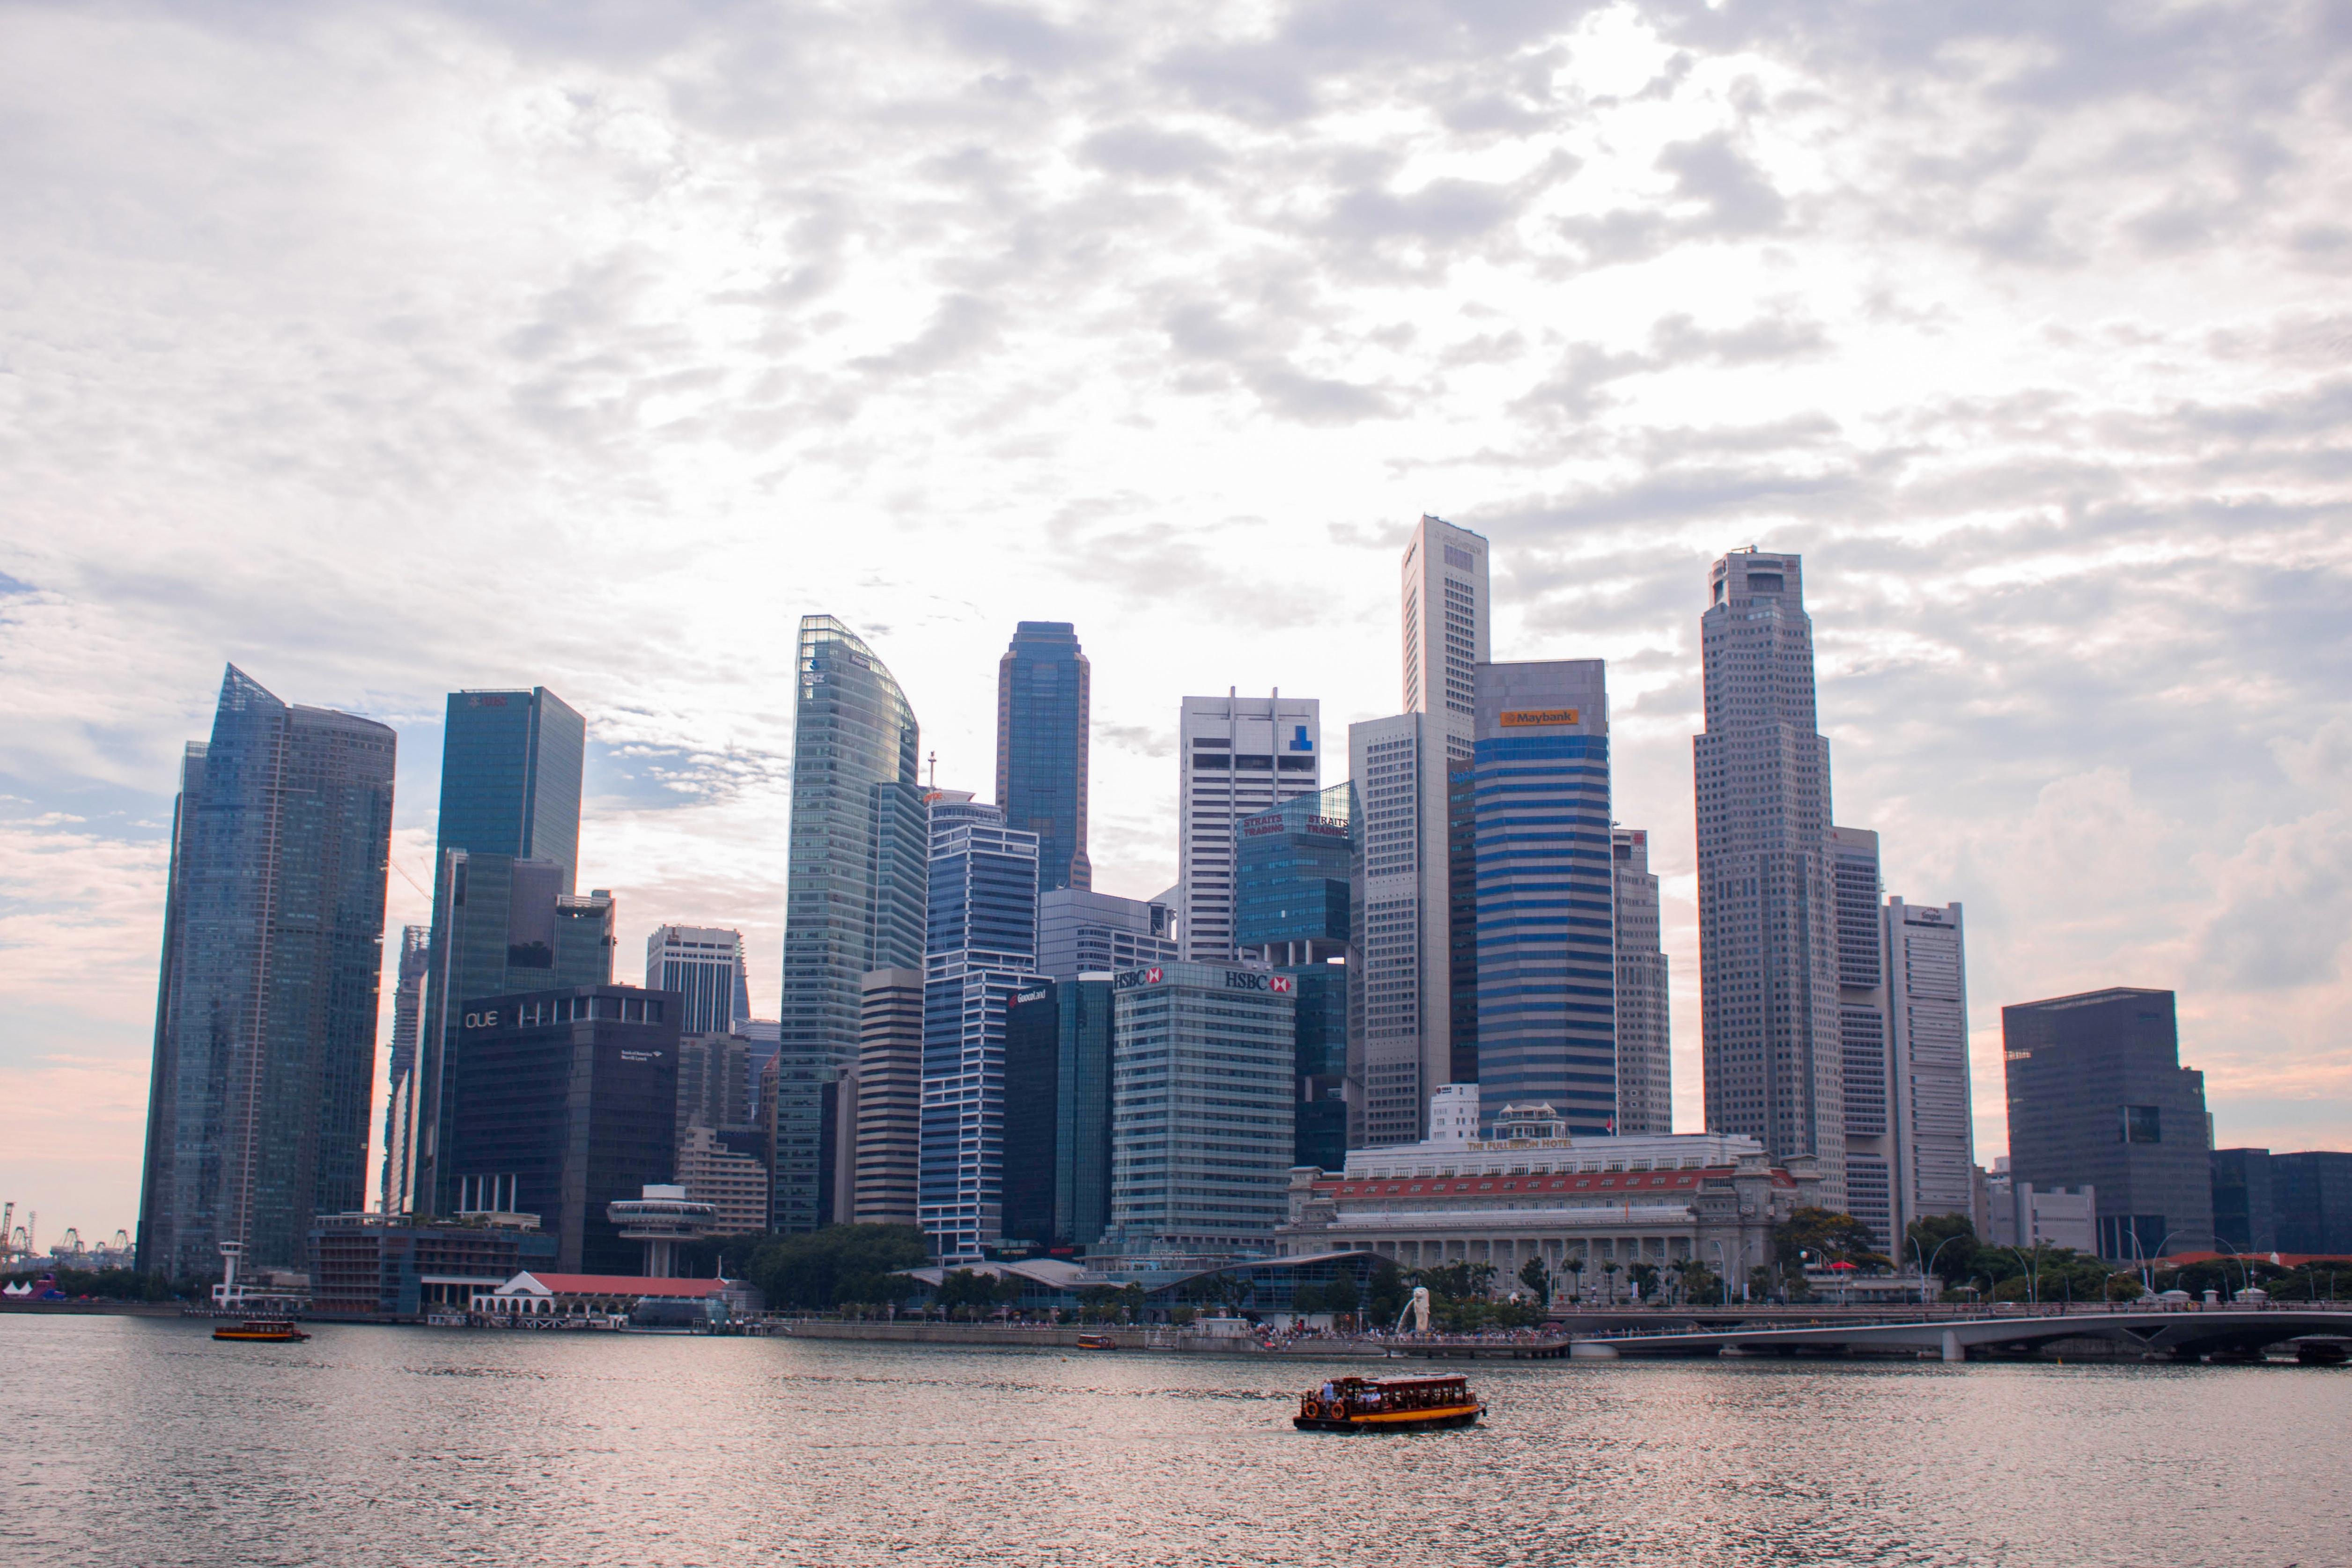 Singapore Skyline Picture. Download Free Image